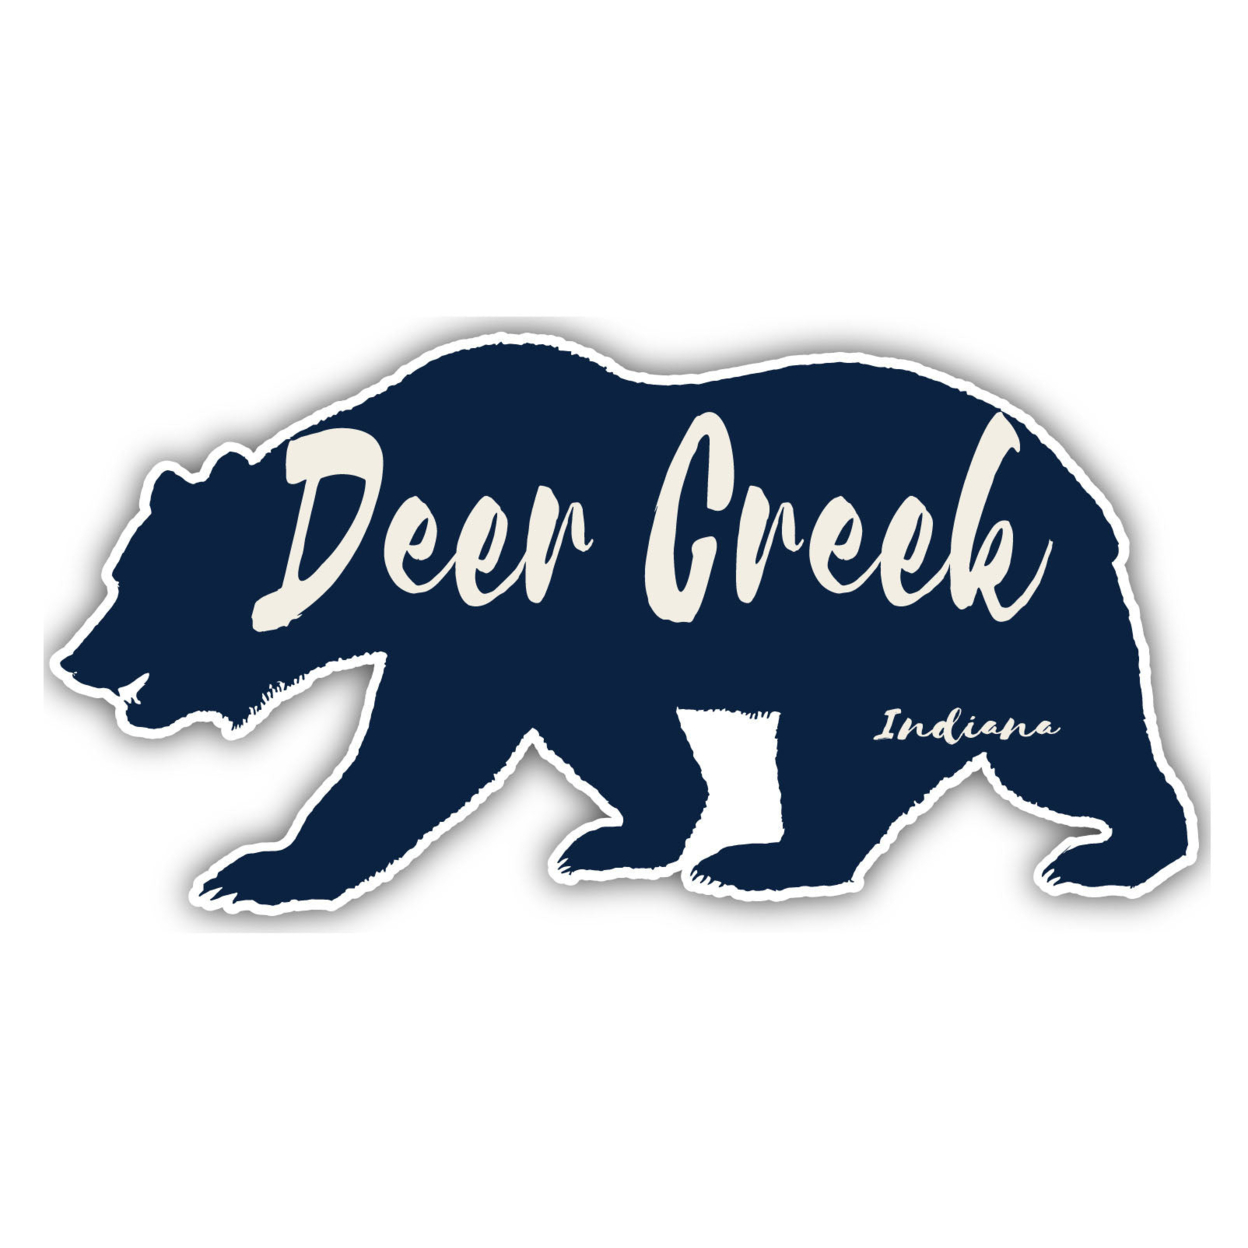 Deer Creek Indiana Souvenir Decorative Stickers (Choose Theme And Size) - Single Unit, 12-Inch, Great Outdoors